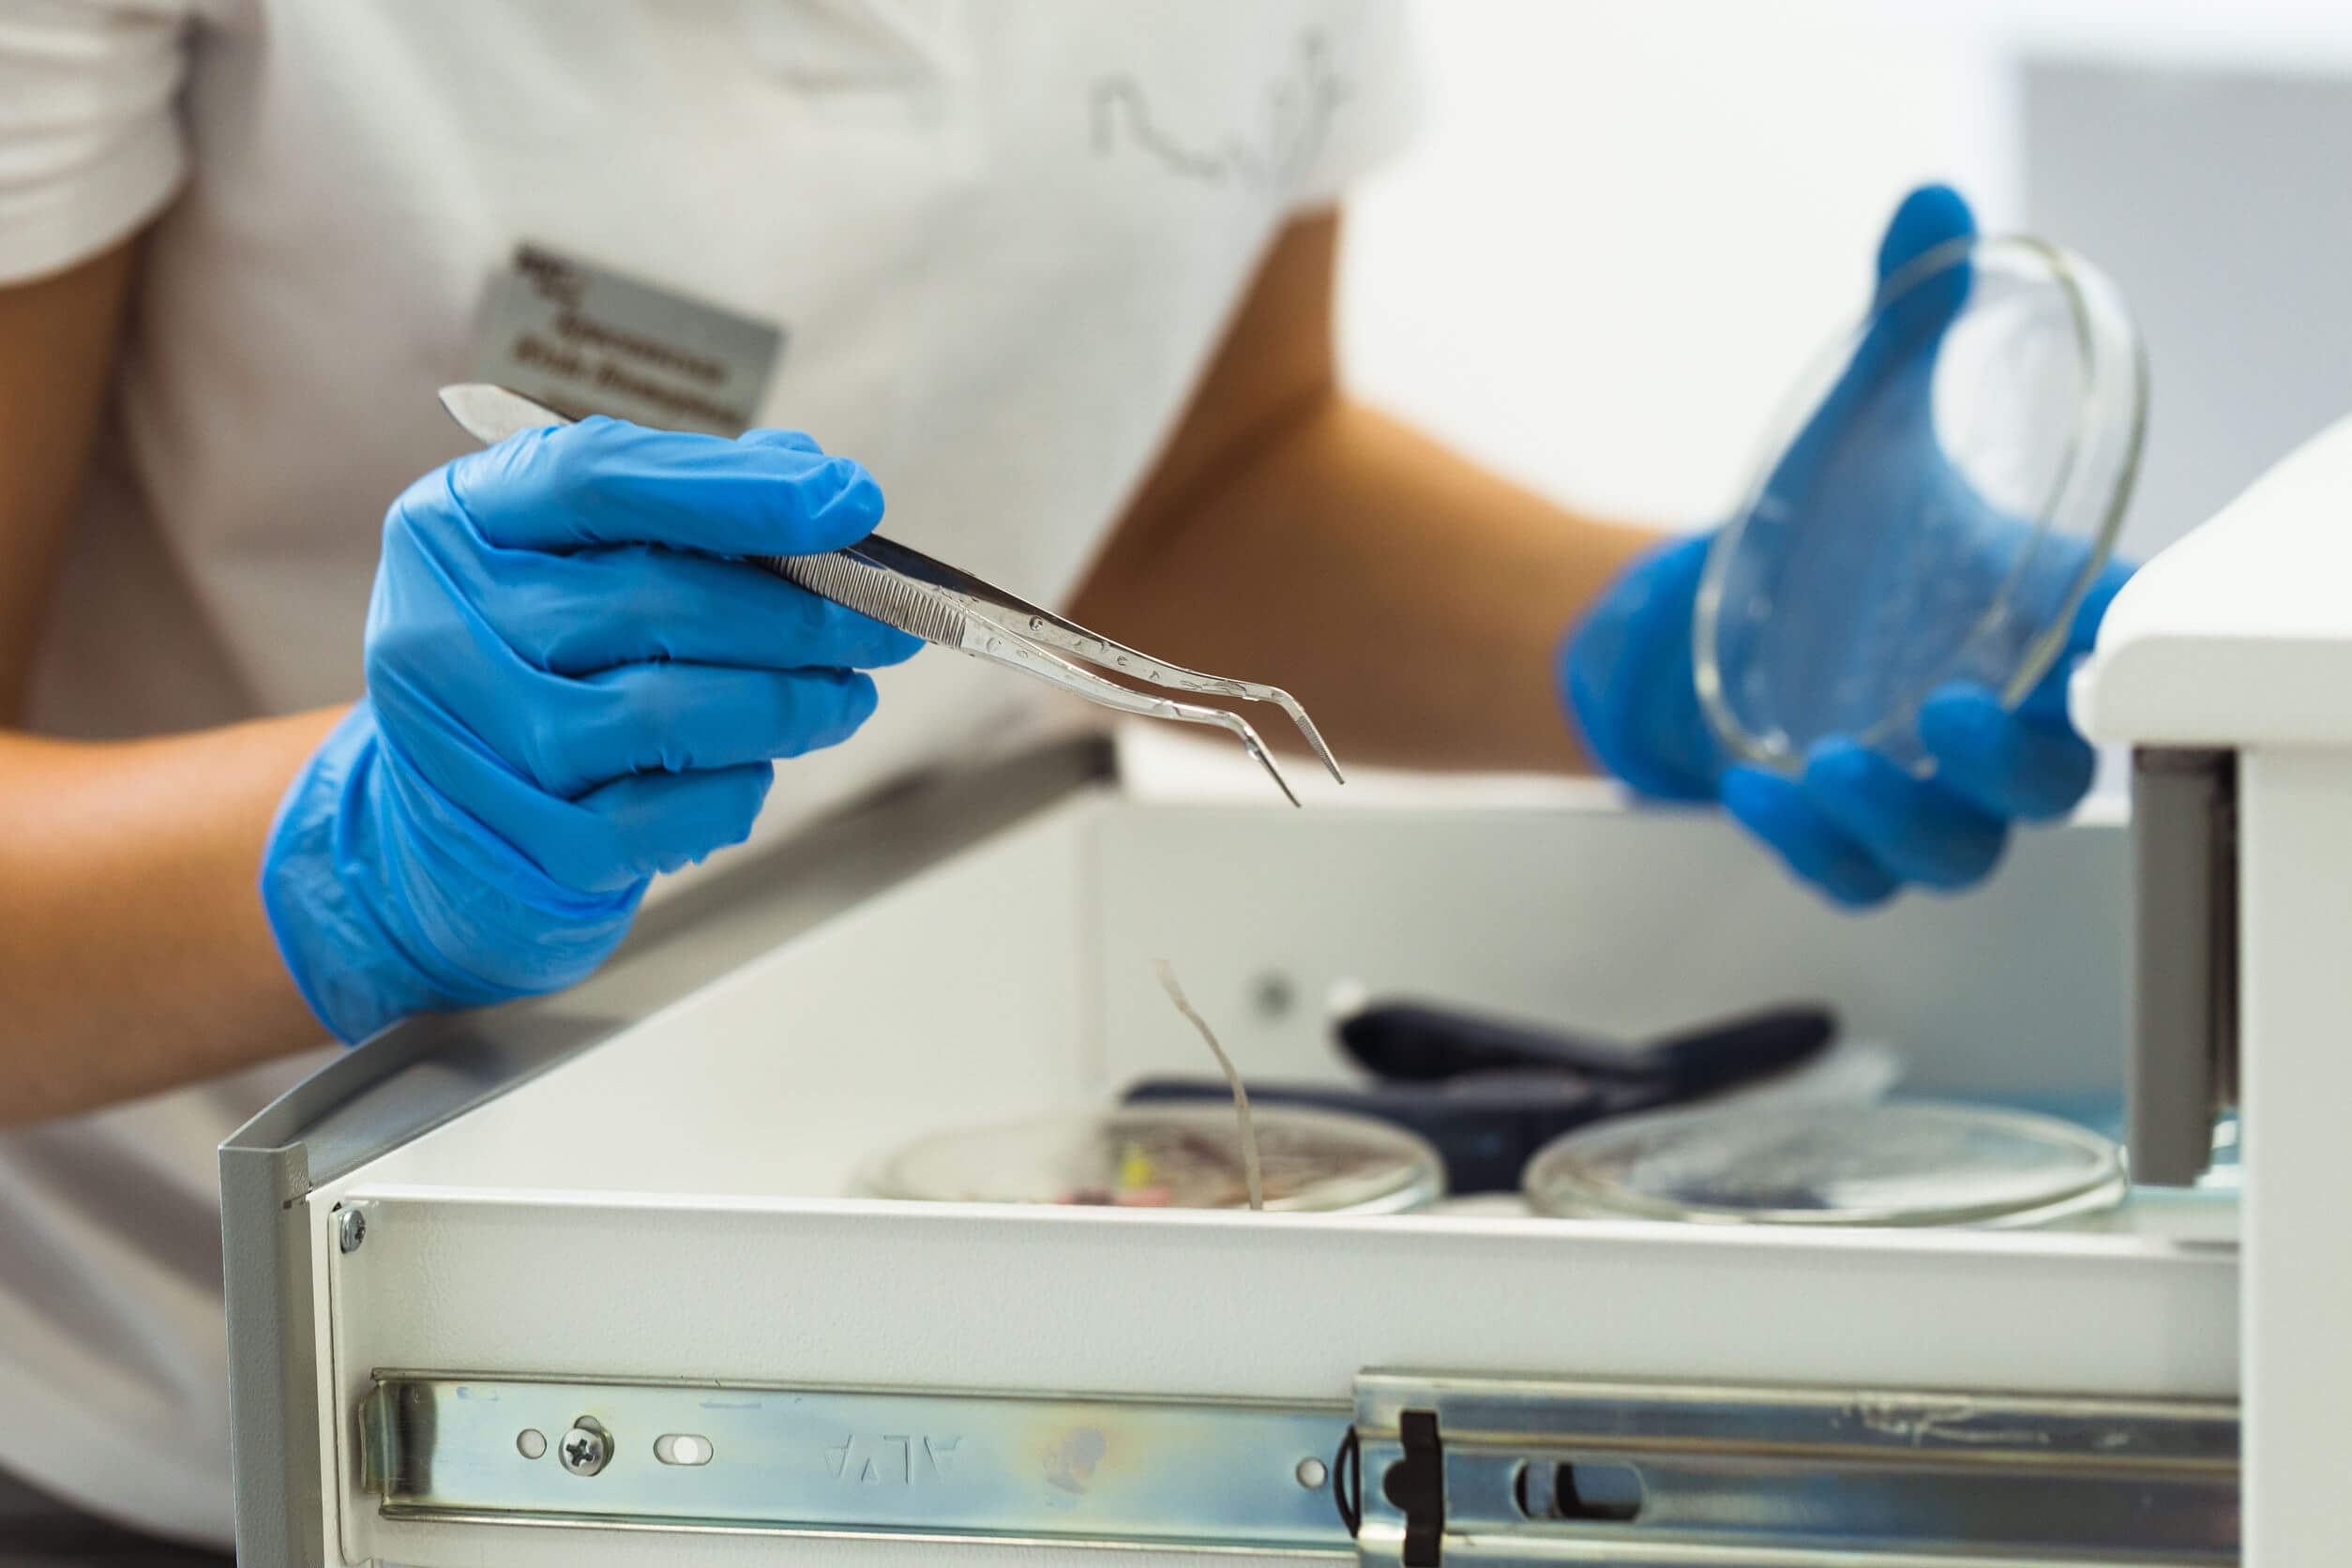 dental-lab-equipment-knowledge-is-mandatory-and-can-help-your-practice